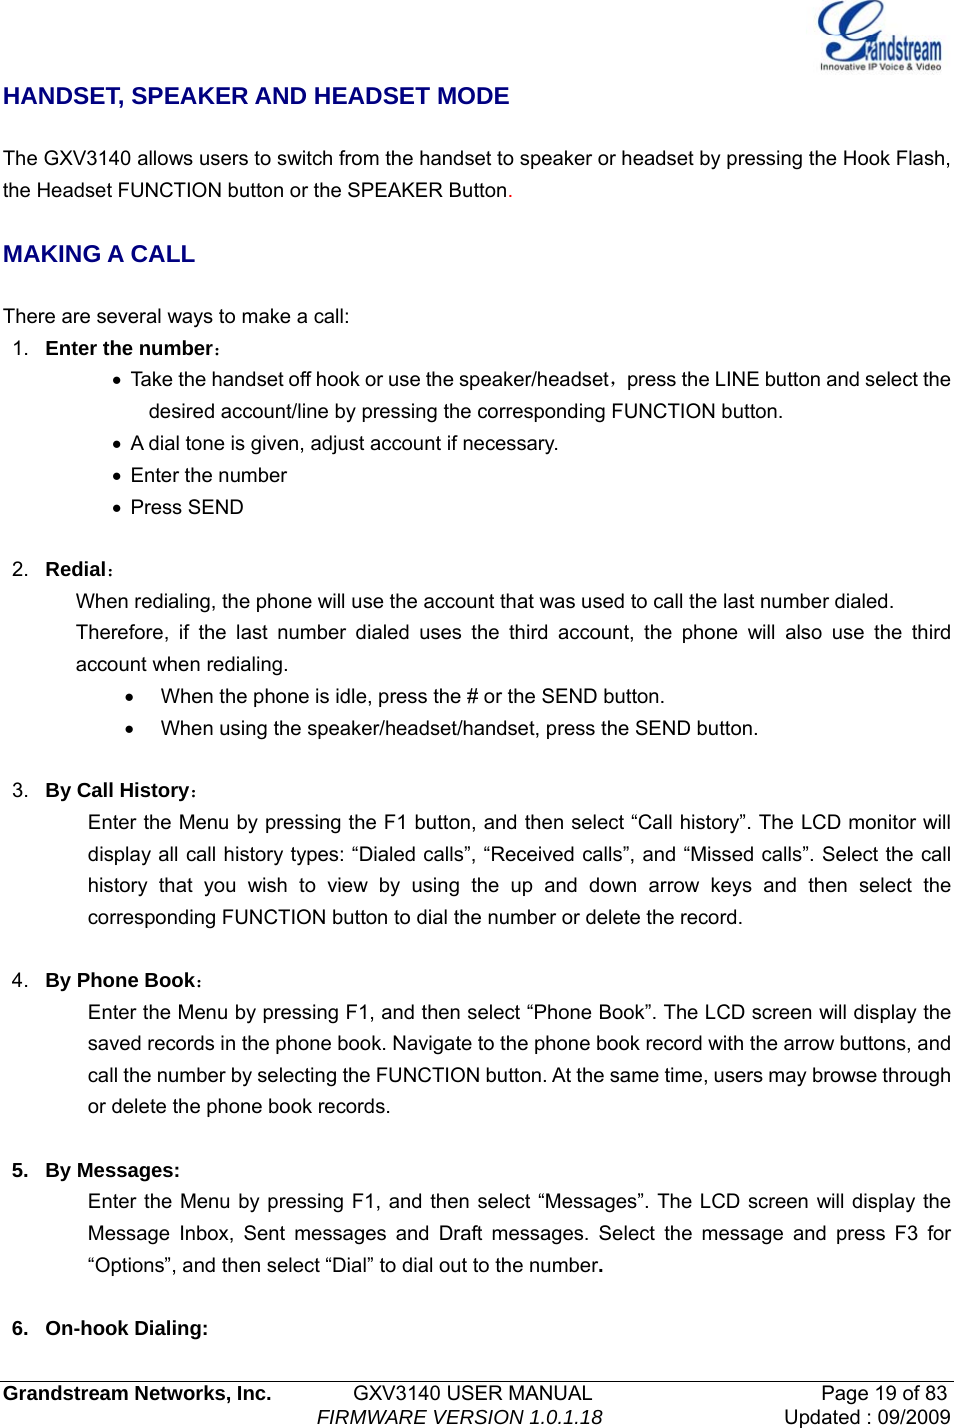   Grandstream Networks, Inc.        GXV3140 USER MANUAL                       Page 19 of 83                                FIRMWARE VERSION 1.0.1.18 Updated : 09/2009  HANDSET, SPEAKER AND HEADSET MODE  The GXV3140 allows users to switch from the handset to speaker or headset by pressing the Hook Flash, the Headset FUNCTION button or the SPEAKER Button.  MAKING A CALL  There are several ways to make a call: 1.  Enter the number： •  Take the handset off hook or use the speaker/headset，press the LINE button and select the desired account/line by pressing the corresponding FUNCTION button. •  A dial tone is given, adjust account if necessary. • Enter the number • Press SEND  2.  Redial： When redialing, the phone will use the account that was used to call the last number dialed. Therefore, if the last number dialed uses the third account, the phone will also use the third account when redialing. •  When the phone is idle, press the # or the SEND button. •  When using the speaker/headset/handset, press the SEND button.  3.  By Call History： Enter the Menu by pressing the F1 button, and then select “Call history”. The LCD monitor will display all call history types: “Dialed calls”, “Received calls”, and “Missed calls”. Select the call history that you wish to view by using the up and down arrow keys and then select the corresponding FUNCTION button to dial the number or delete the record.    4.  By Phone Book： Enter the Menu by pressing F1, and then select “Phone Book”. The LCD screen will display the saved records in the phone book. Navigate to the phone book record with the arrow buttons, and call the number by selecting the FUNCTION button. At the same time, users may browse through or delete the phone book records.  5. By Messages: Enter the Menu by pressing F1, and then select “Messages”. The LCD screen will display the Message Inbox, Sent messages and Draft messages. Select the message and press F3 for “Options”, and then select “Dial” to dial out to the number.   6. On-hook Dialing: 